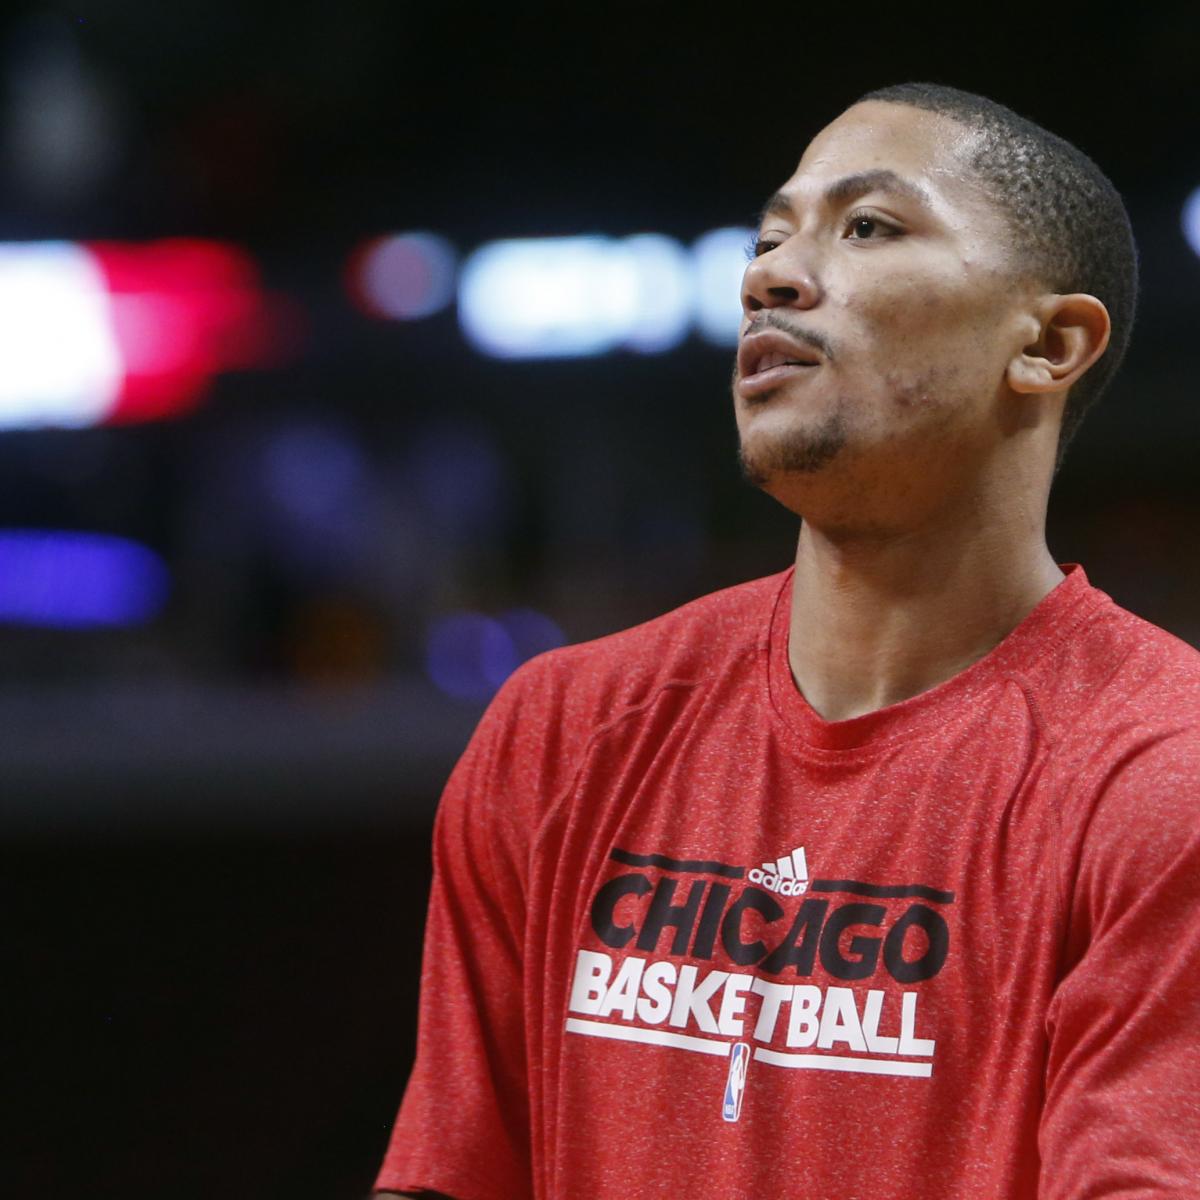 ESPN Stats & Info on X: At 30 years and 27 days old, Derrick Rose